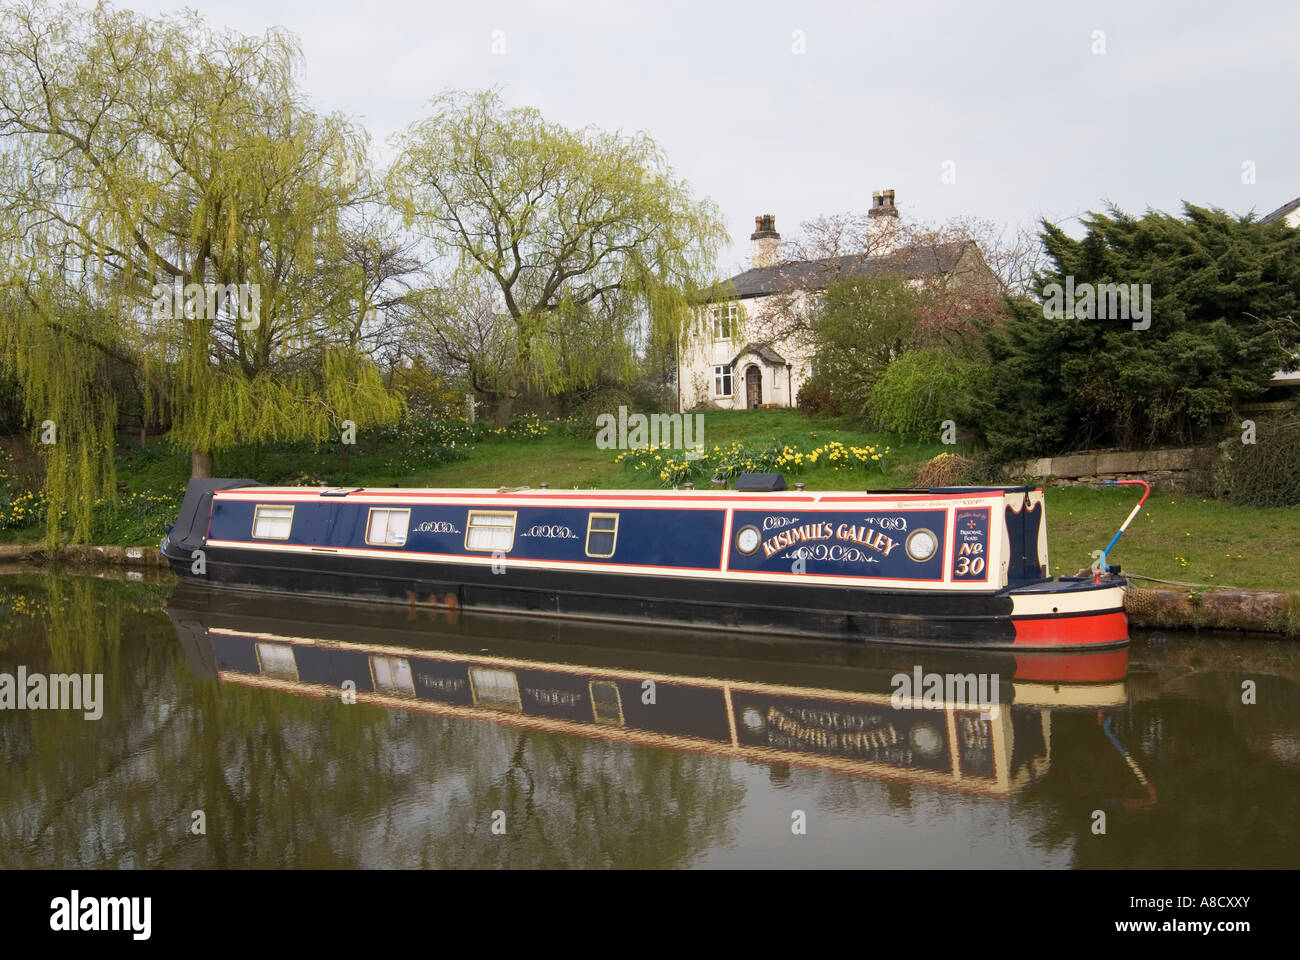 Narrowboat moored on the Macclesfield canal by a canalside dwelling Stock Photo